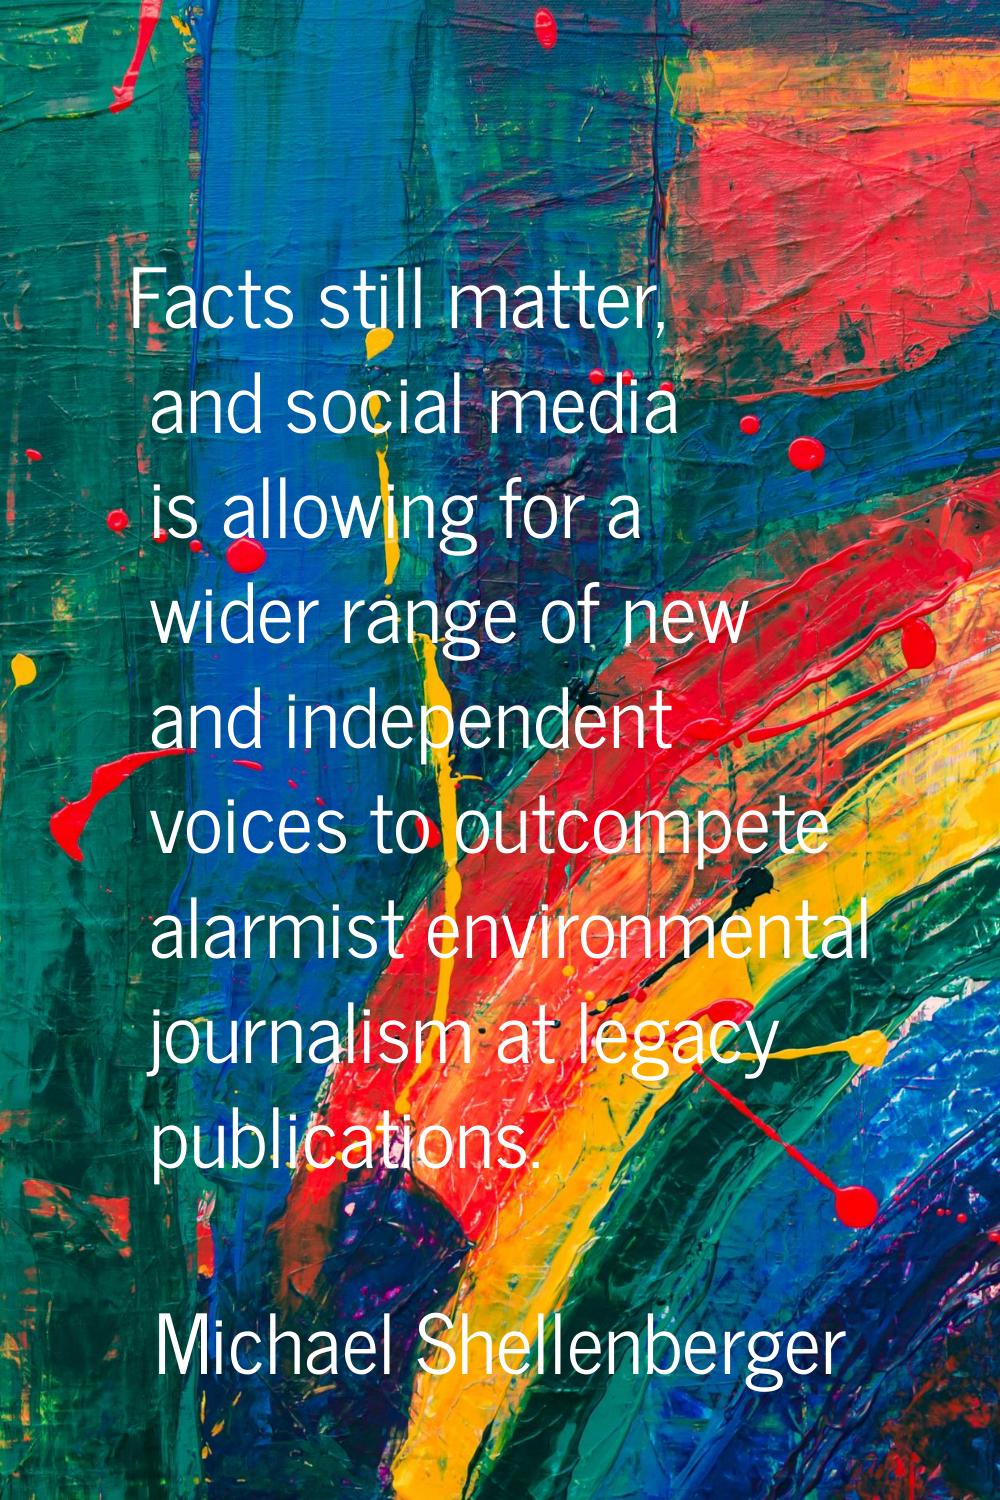 Facts still matter, and social media is allowing for a wider range of new and independent voices to